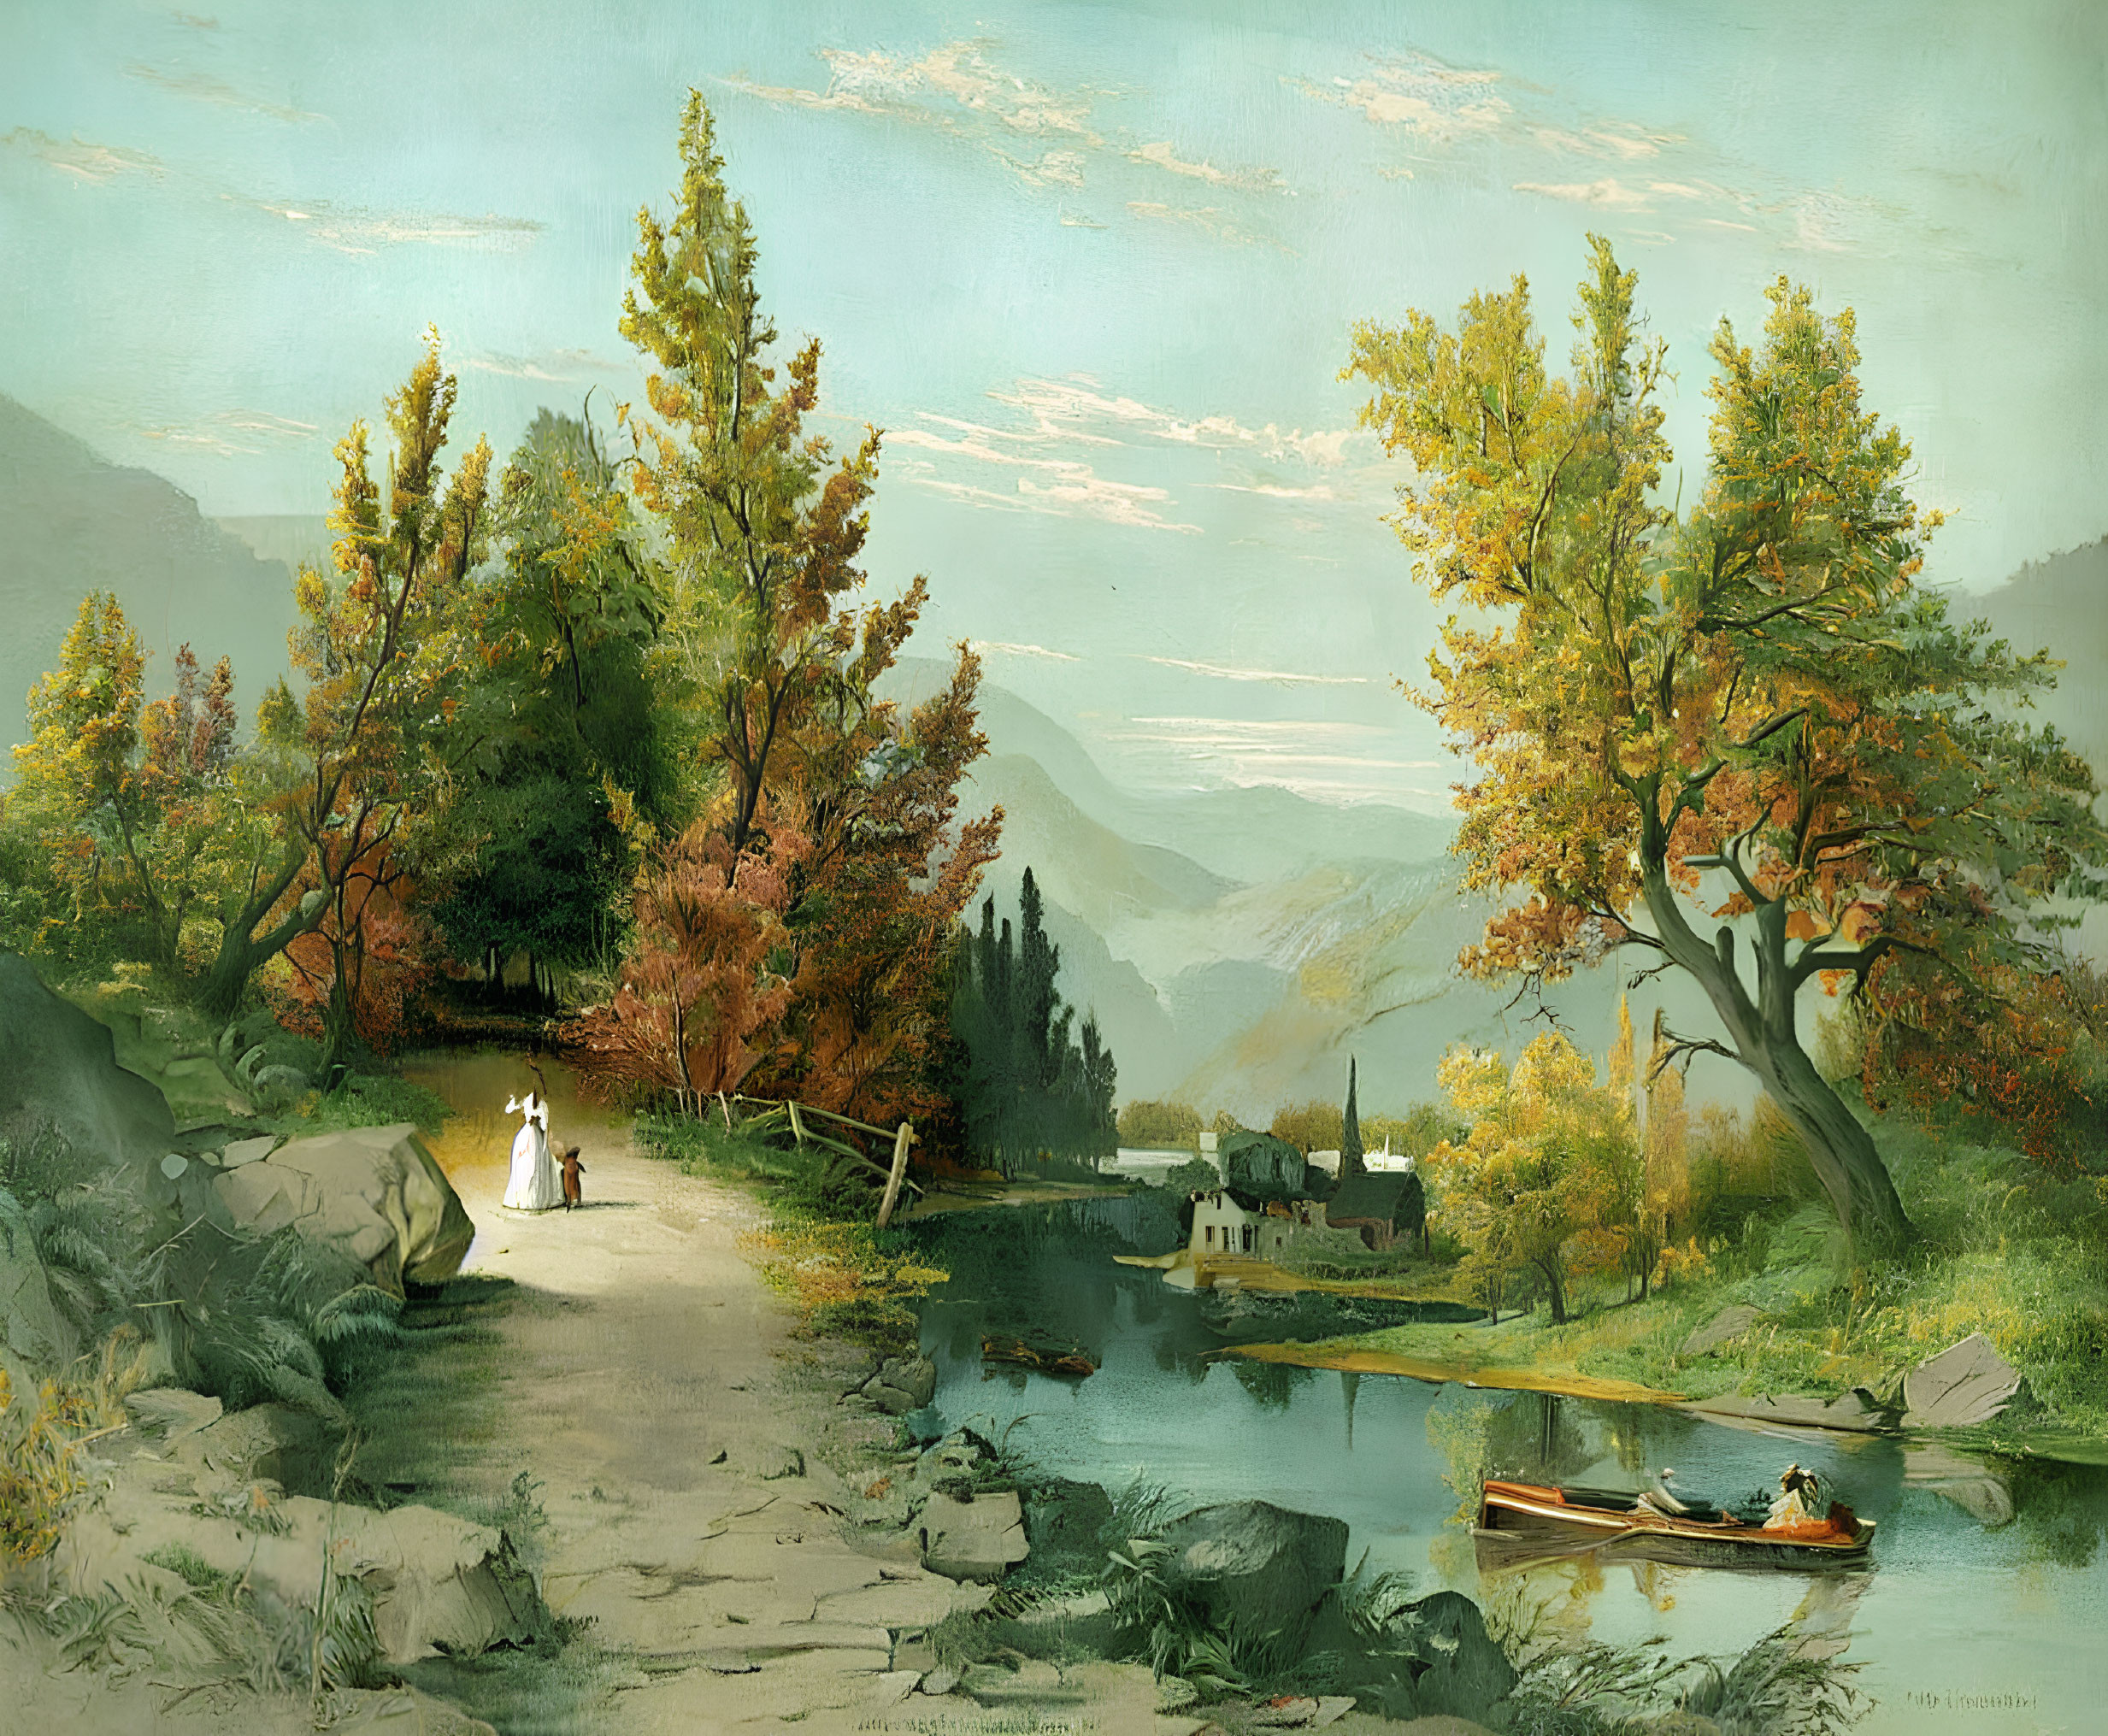 Tranquil landscape painting with couple, boat, house, trees, and mountains